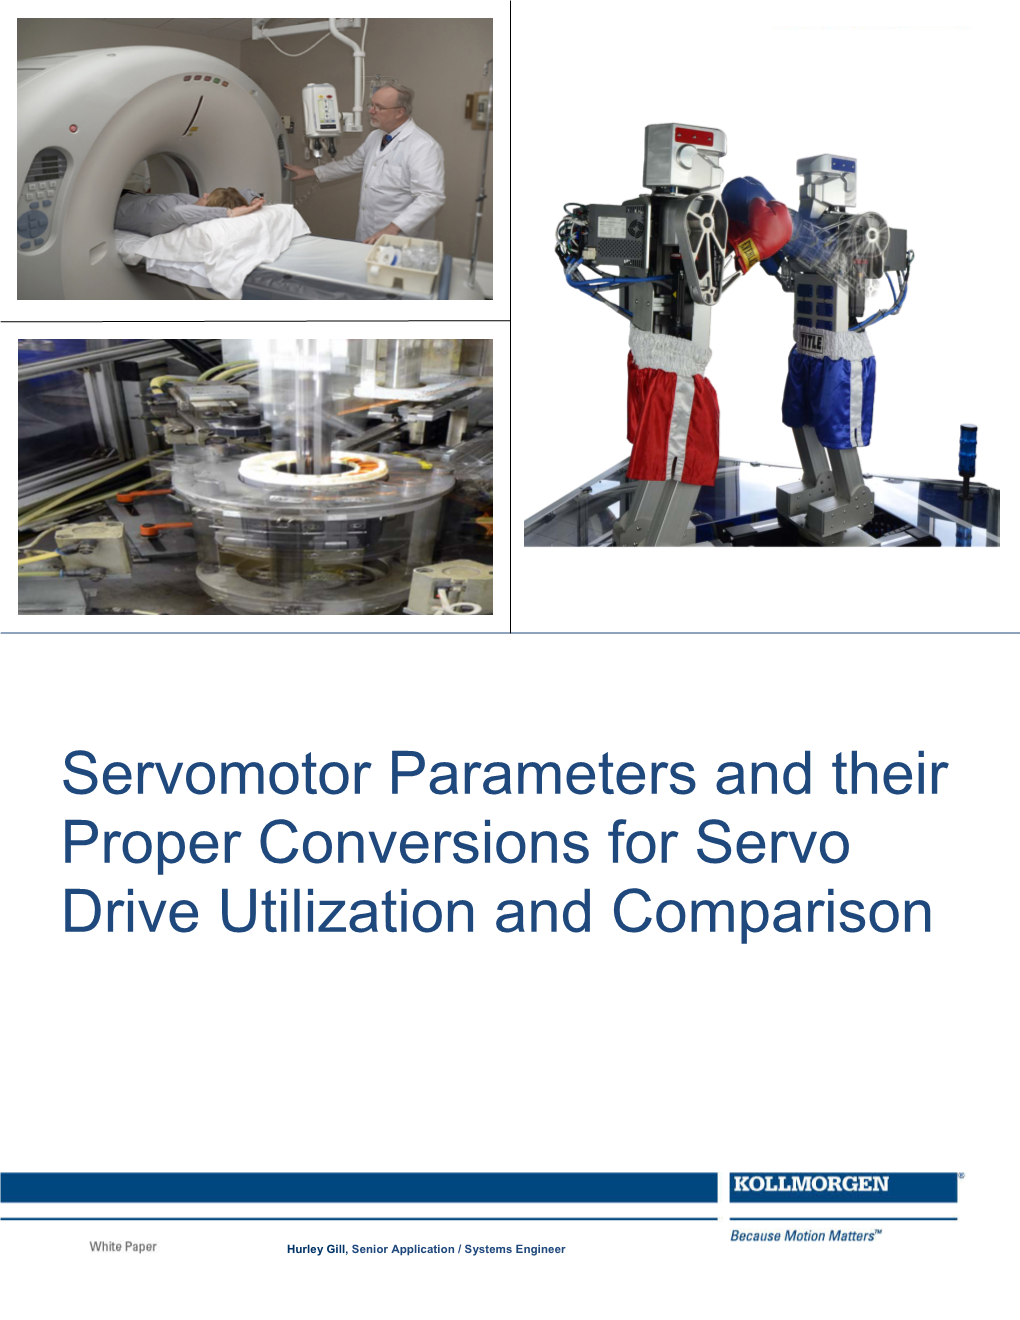 Servomotor Parameters and Their Proper Conversions for Servo Drive Utilization and Comparison